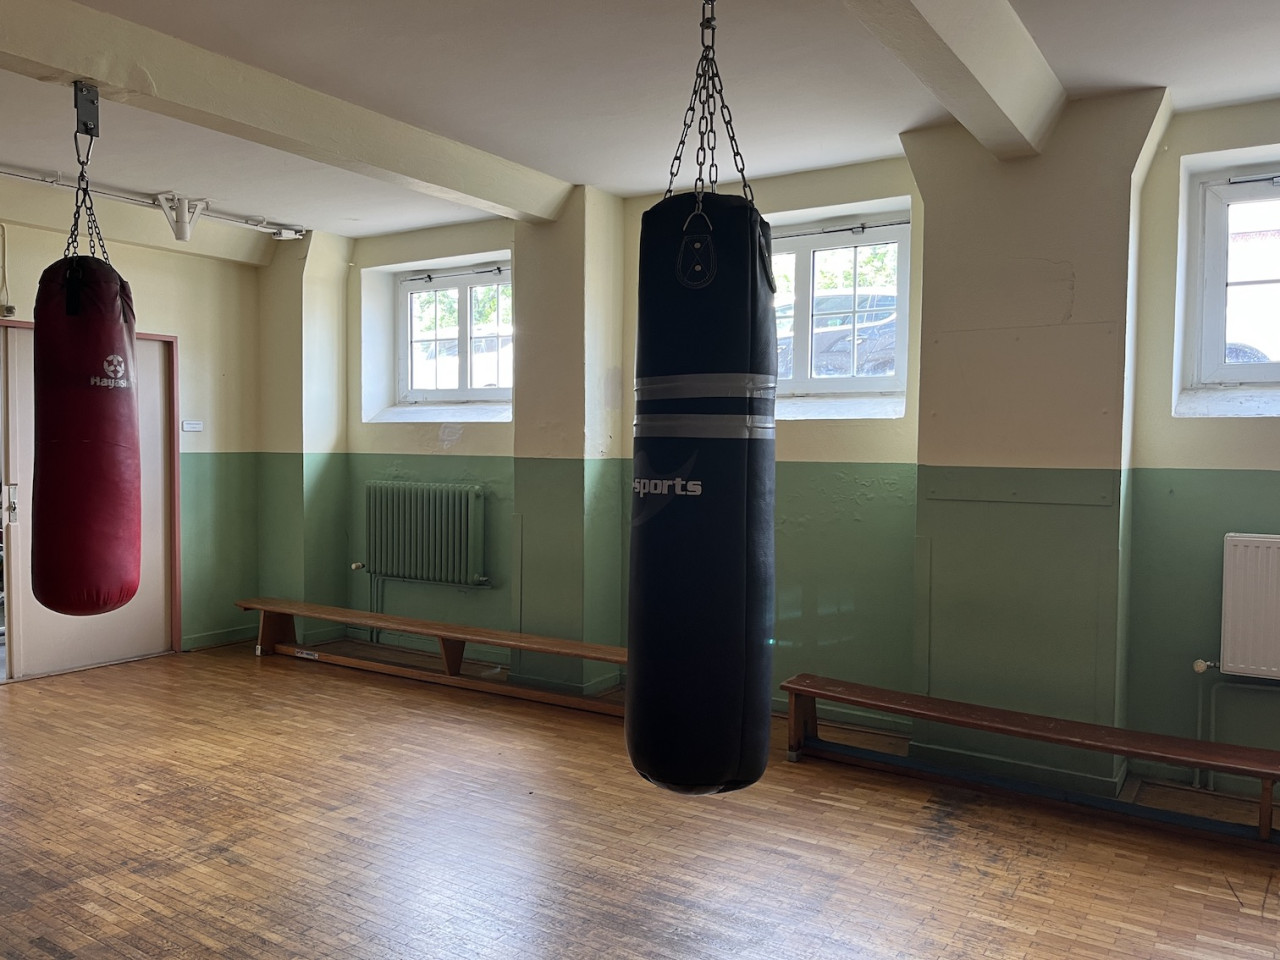 plush74 location film photo event germany berlin vintage gym fitness boxing 151